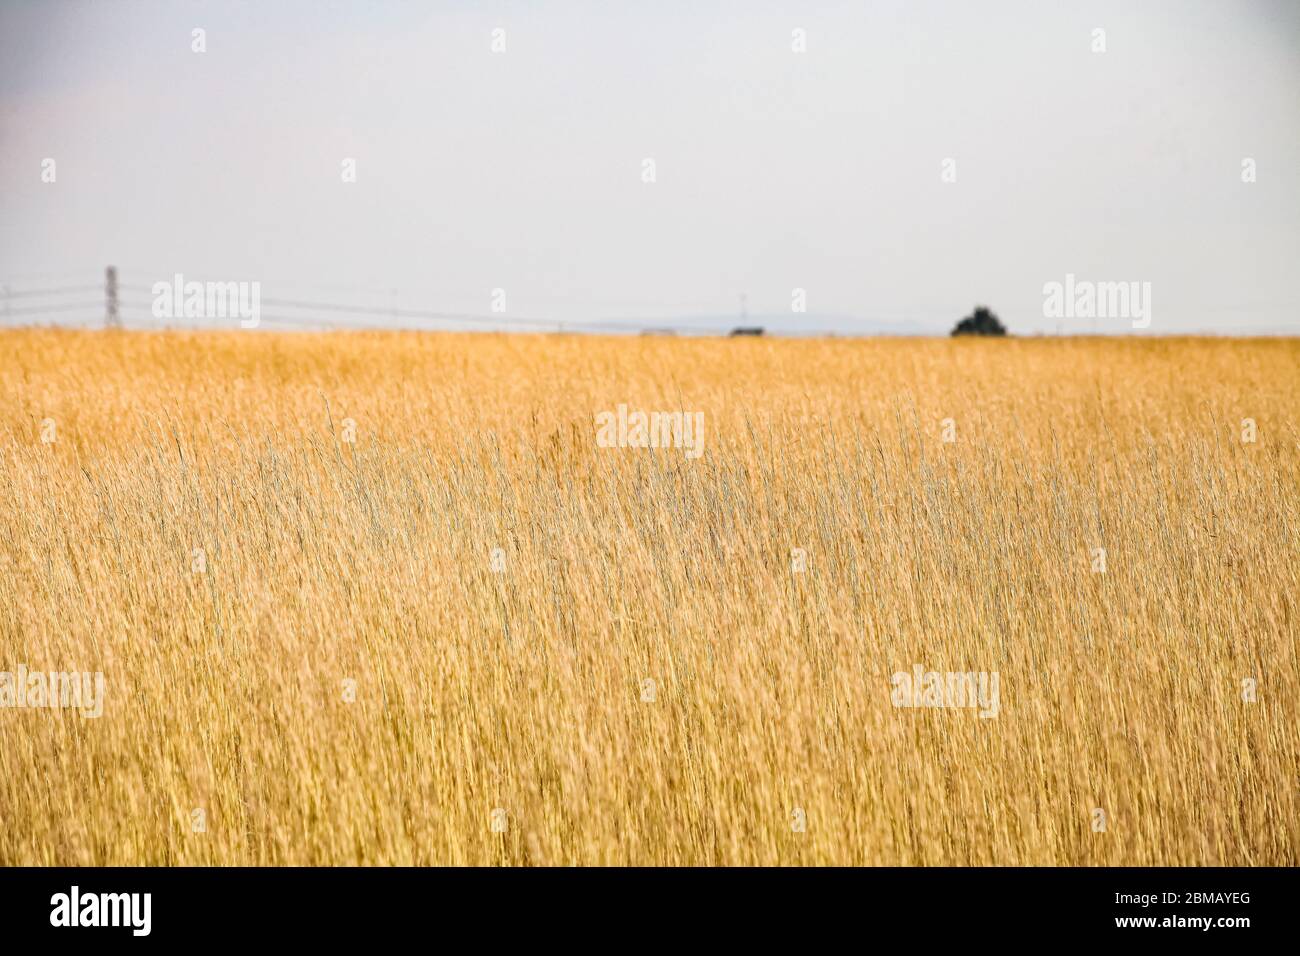 Wide Angle of dry brown wild grass in rural area of South Africa's Highveld region Stock Photo